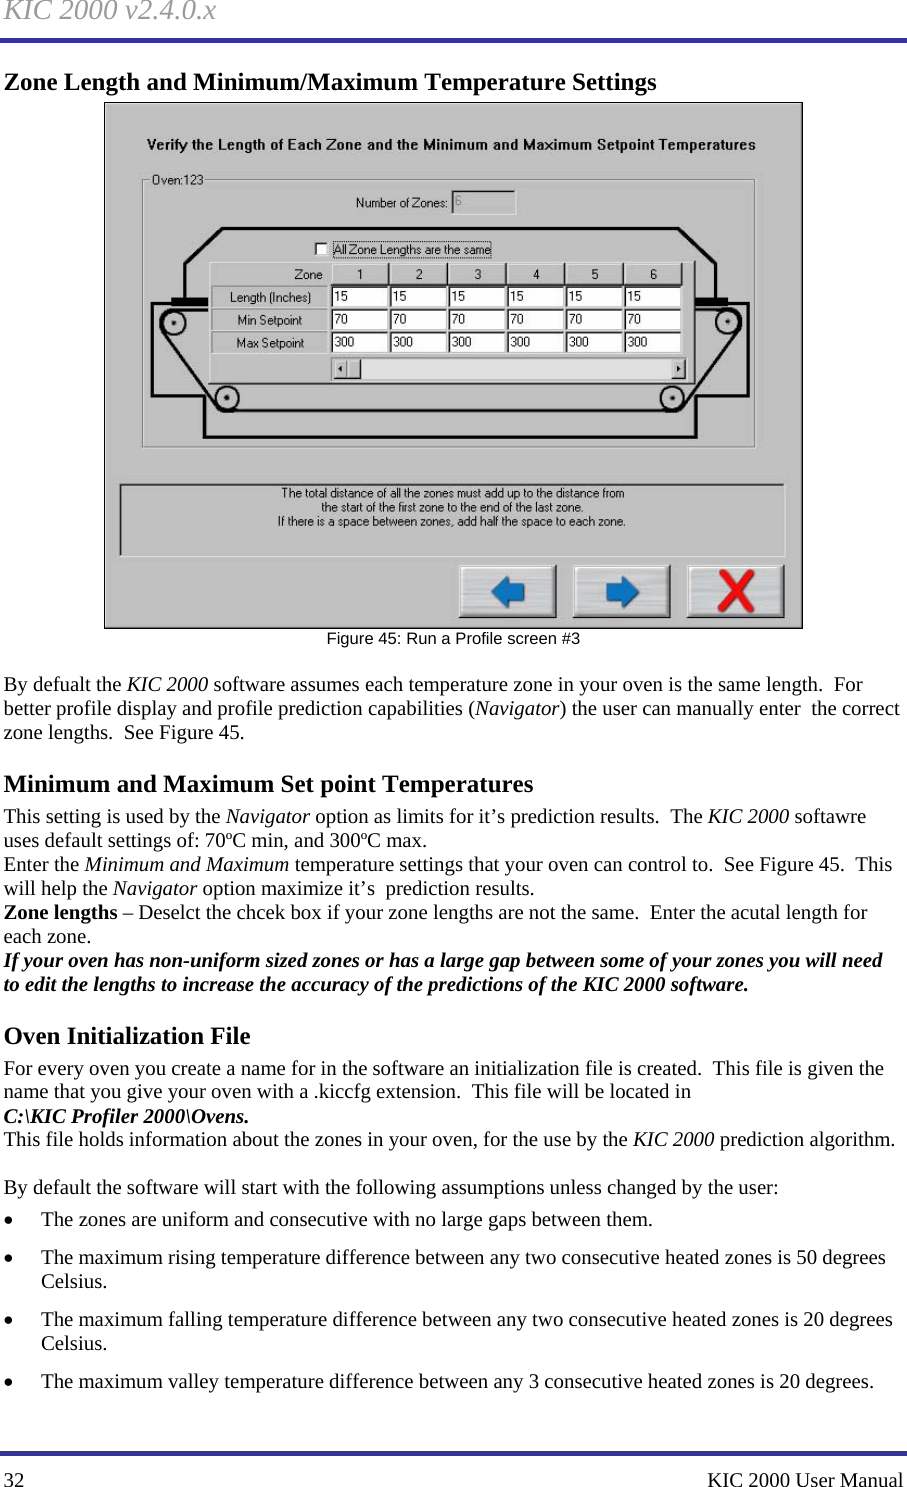 KIC 2000 v2.4.0.x 32    KIC 2000 User Manual Zone Length and Minimum/Maximum Temperature Settings  Figure 45: Run a Profile screen #3  By defualt the KIC 2000 software assumes each temperature zone in your oven is the same length.  For better profile display and profile prediction capabilities (Navigator) the user can manually enter  the correct zone lengths.  See Figure 45.   Minimum and Maximum Set point Temperatures This setting is used by the Navigator option as limits for it’s prediction results.  The KIC 2000 softawre uses default settings of: 70ºC min, and 300ºC max. Enter the Minimum and Maximum temperature settings that your oven can control to.  See Figure 45.  This will help the Navigator option maximize it’s  prediction results. Zone lengths – Deselct the chcek box if your zone lengths are not the same.  Enter the acutal length for each zone.   If your oven has non-uniform sized zones or has a large gap between some of your zones you will need to edit the lengths to increase the accuracy of the predictions of the KIC 2000 software. Oven Initialization File For every oven you create a name for in the software an initialization file is created.  This file is given the name that you give your oven with a .kiccfg extension.  This file will be located in C:\KIC Profiler 2000\Ovens. This file holds information about the zones in your oven, for the use by the KIC 2000 prediction algorithm.    By default the software will start with the following assumptions unless changed by the user: • The zones are uniform and consecutive with no large gaps between them. • The maximum rising temperature difference between any two consecutive heated zones is 50 degrees Celsius. • The maximum falling temperature difference between any two consecutive heated zones is 20 degrees Celsius. • The maximum valley temperature difference between any 3 consecutive heated zones is 20 degrees. 